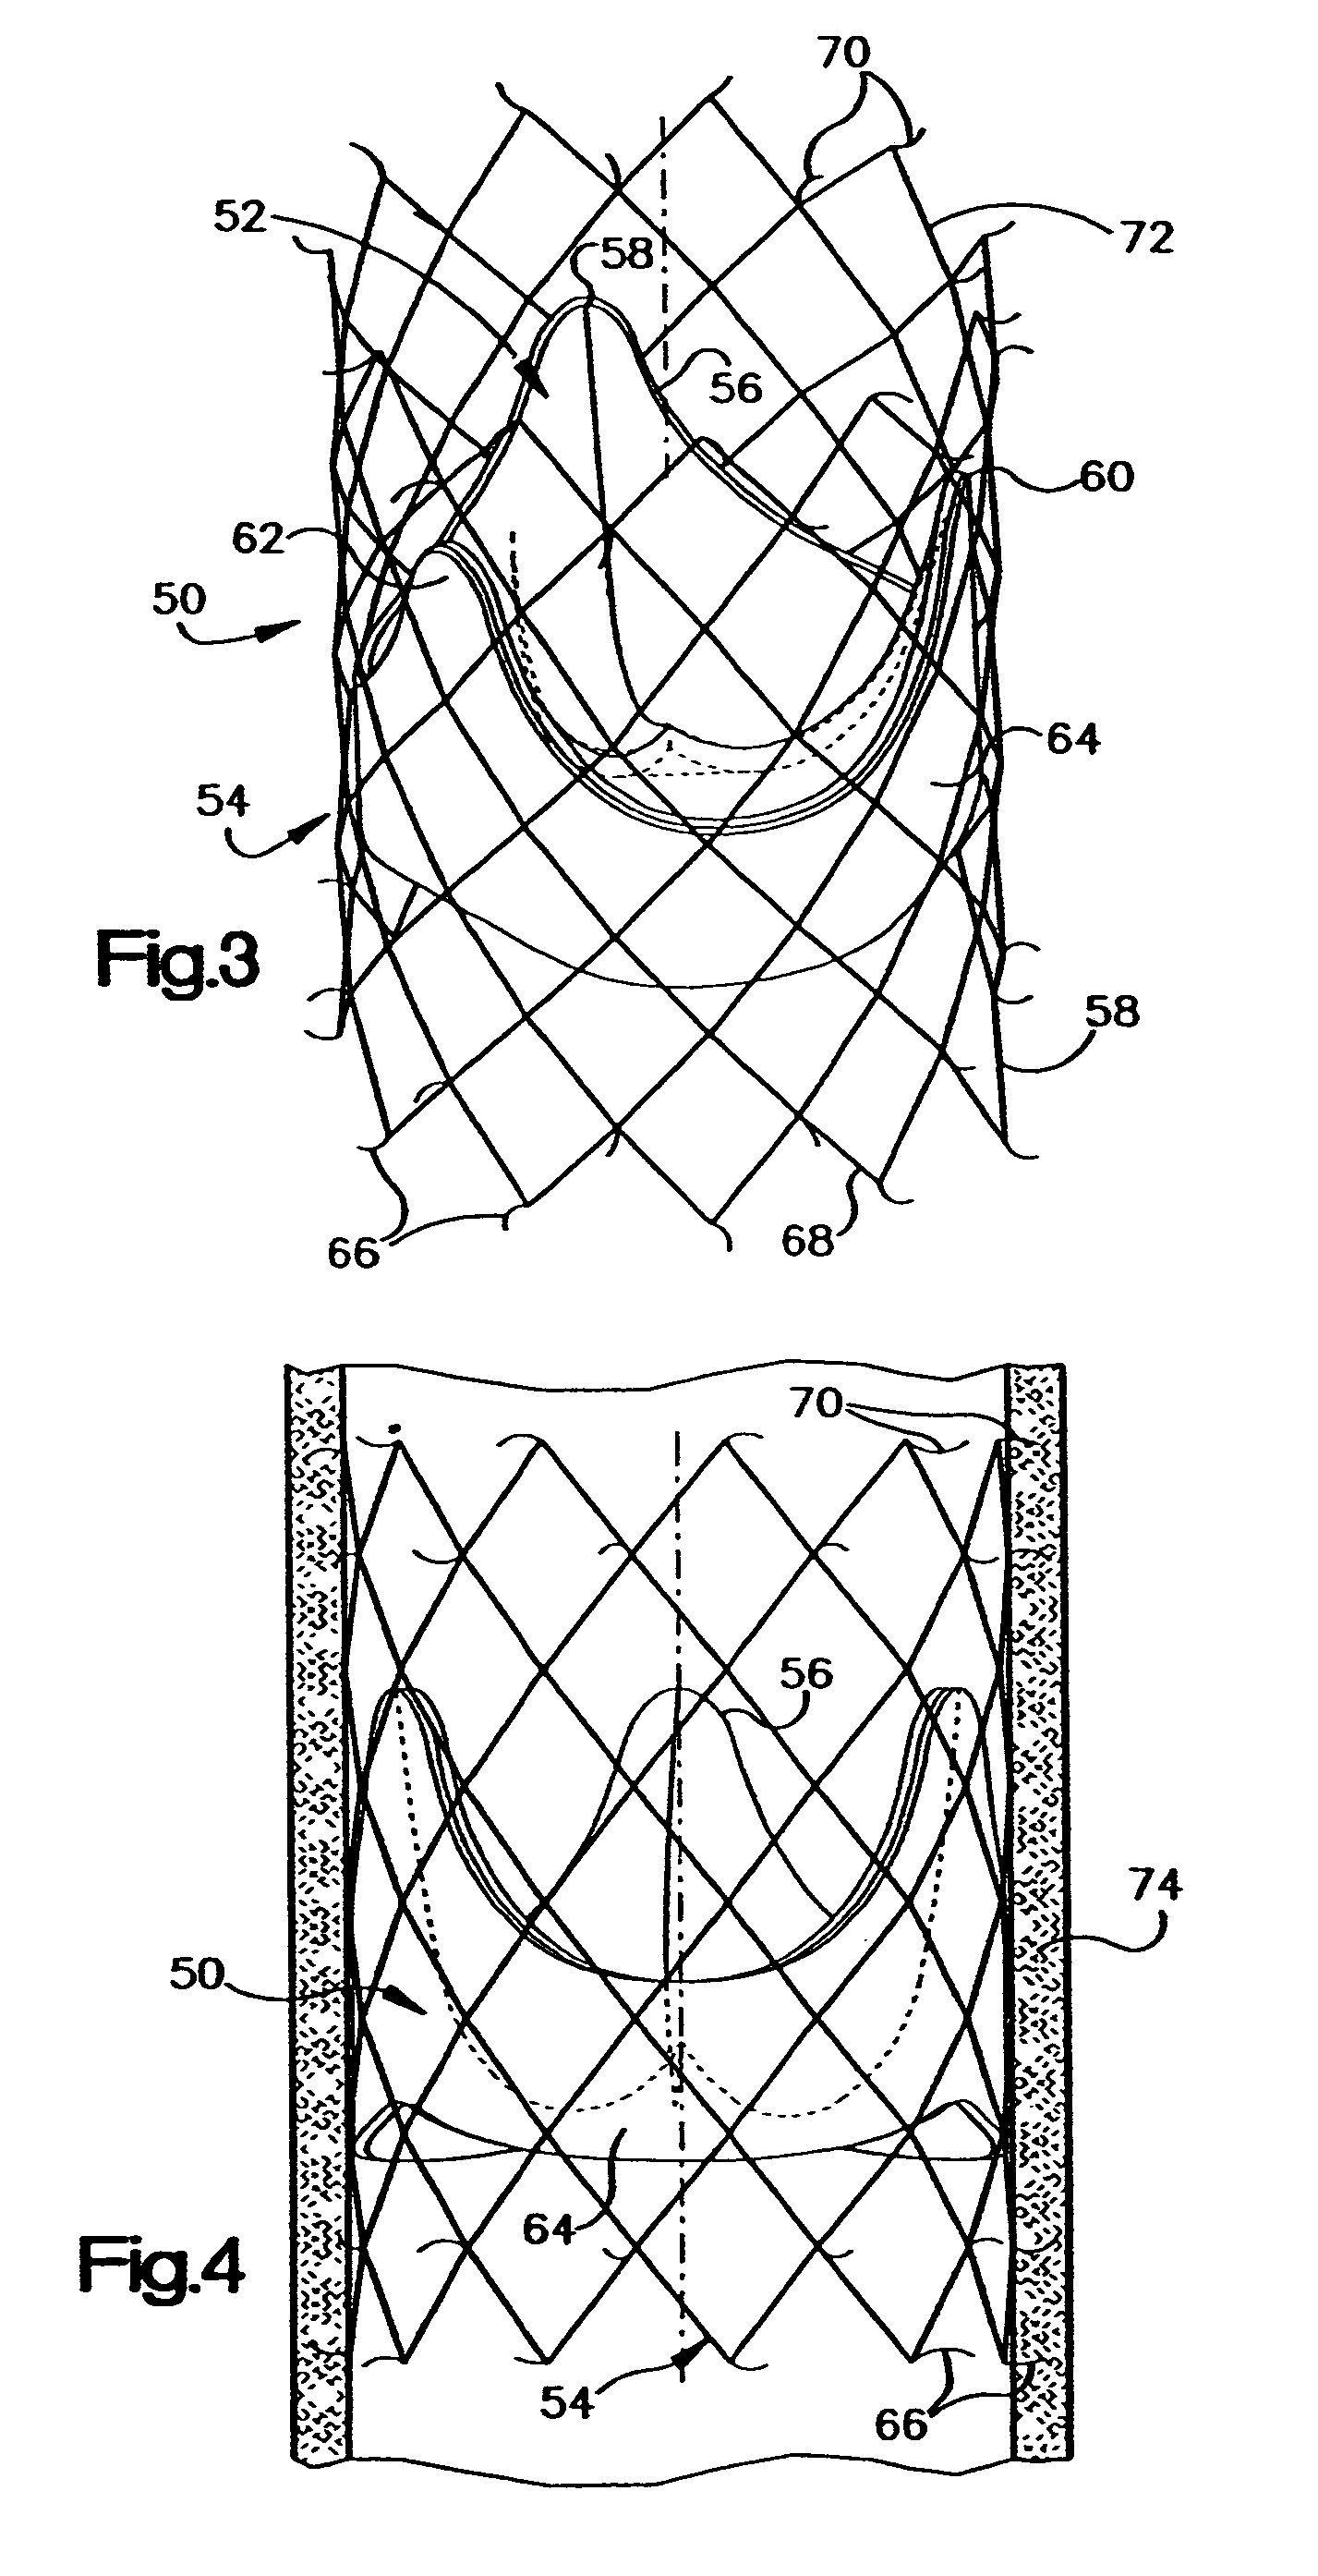 Implantation system for delivery of a heart valve prosthesis